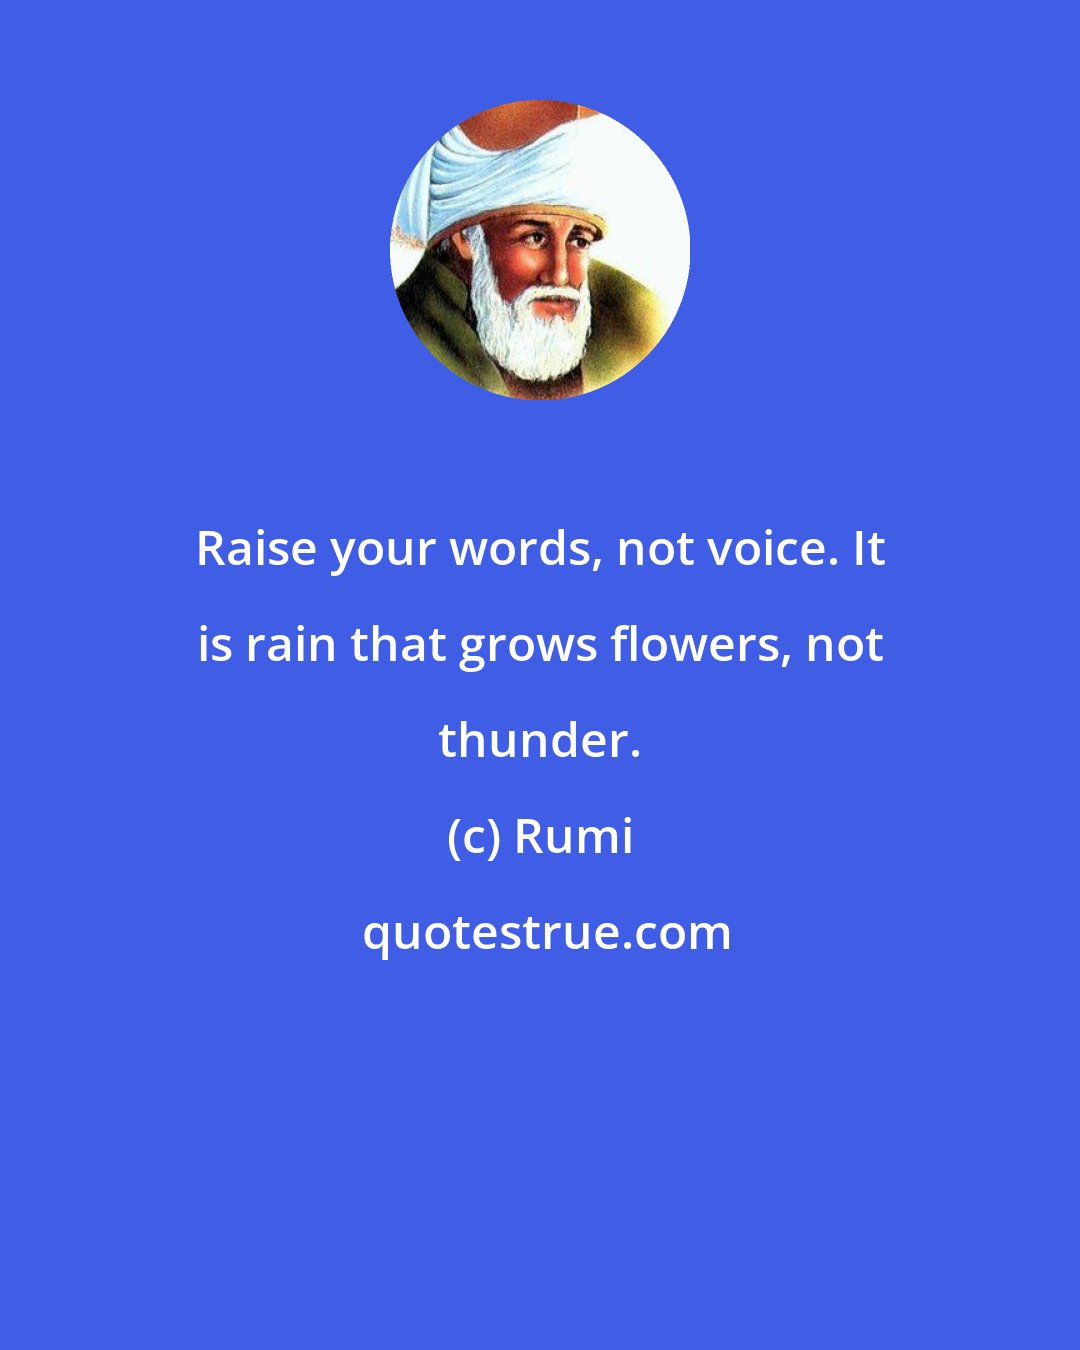 Rumi: Raise your words, not voice. It is rain that grows flowers, not thunder.